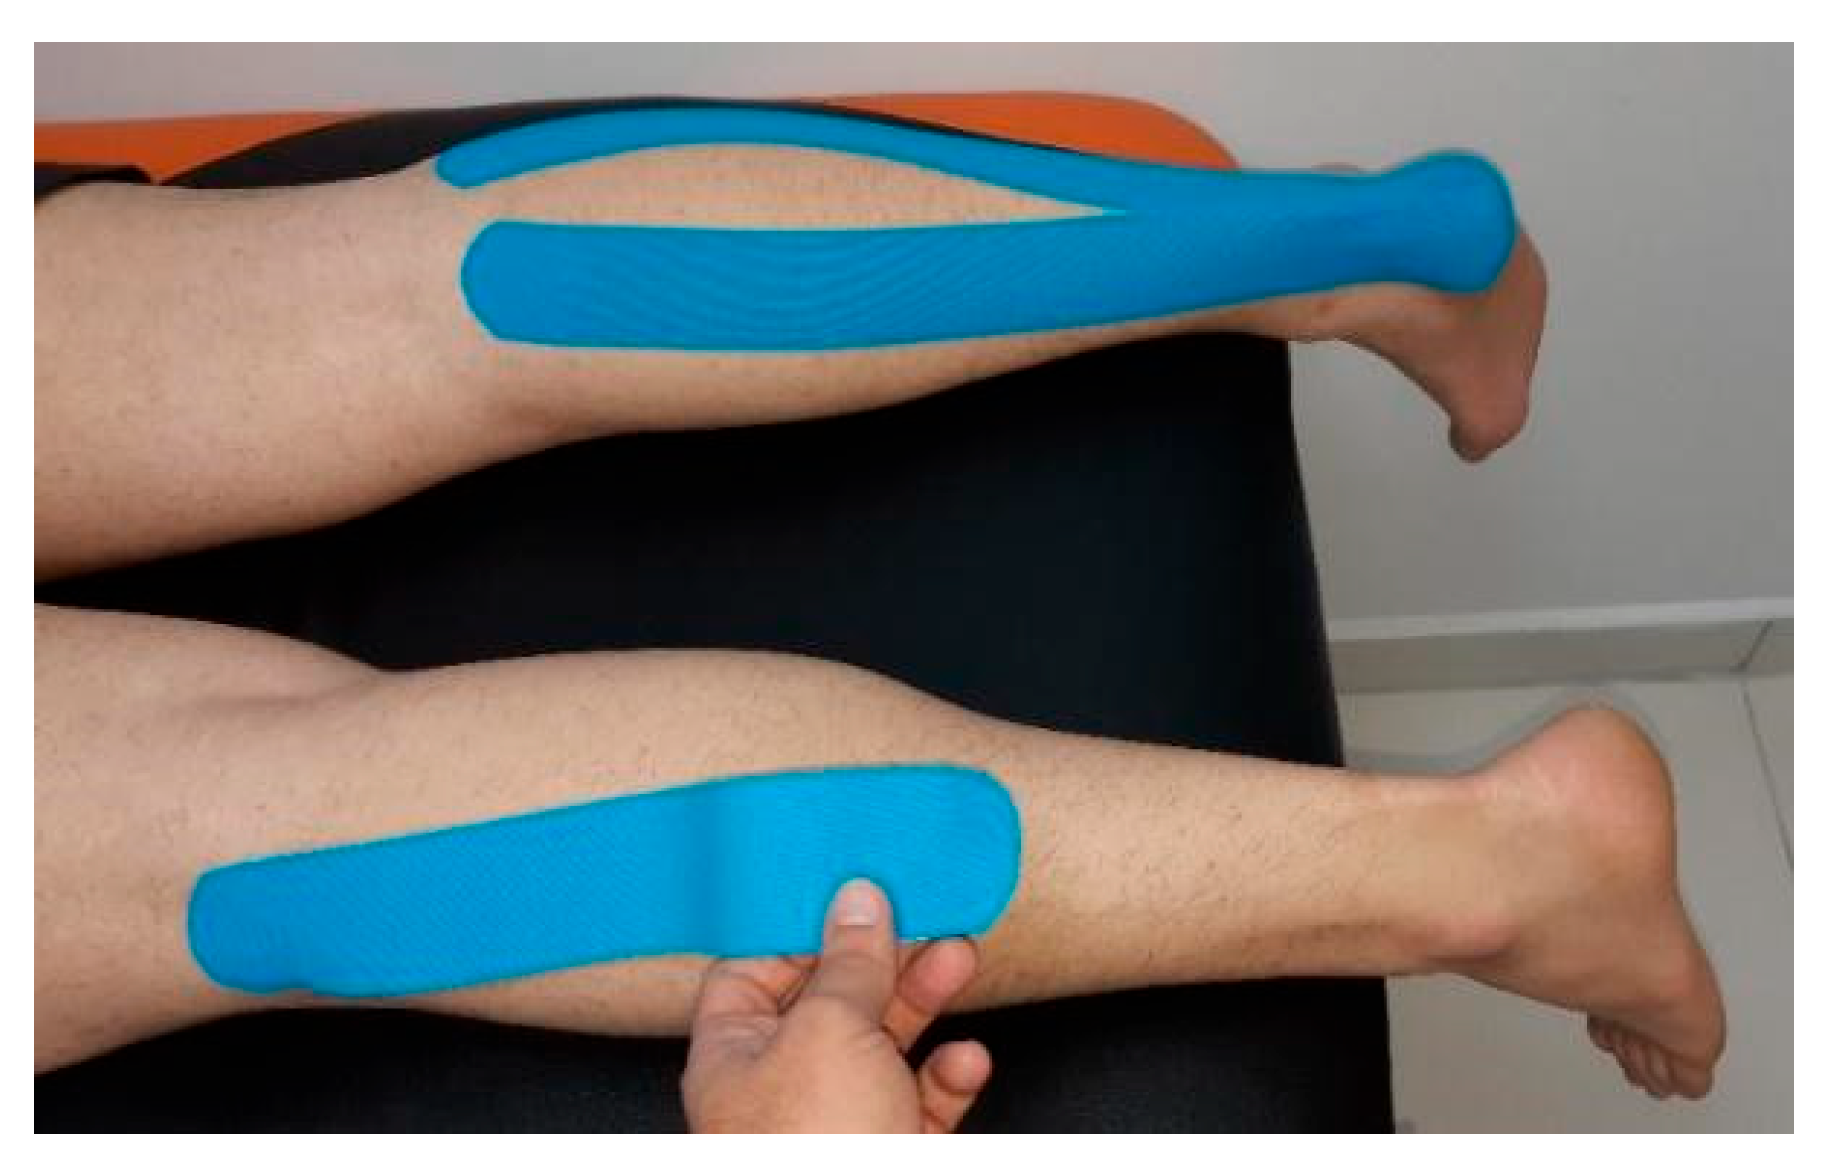 Kinesio tape application. (A) With tension (stabilizing effect): 2